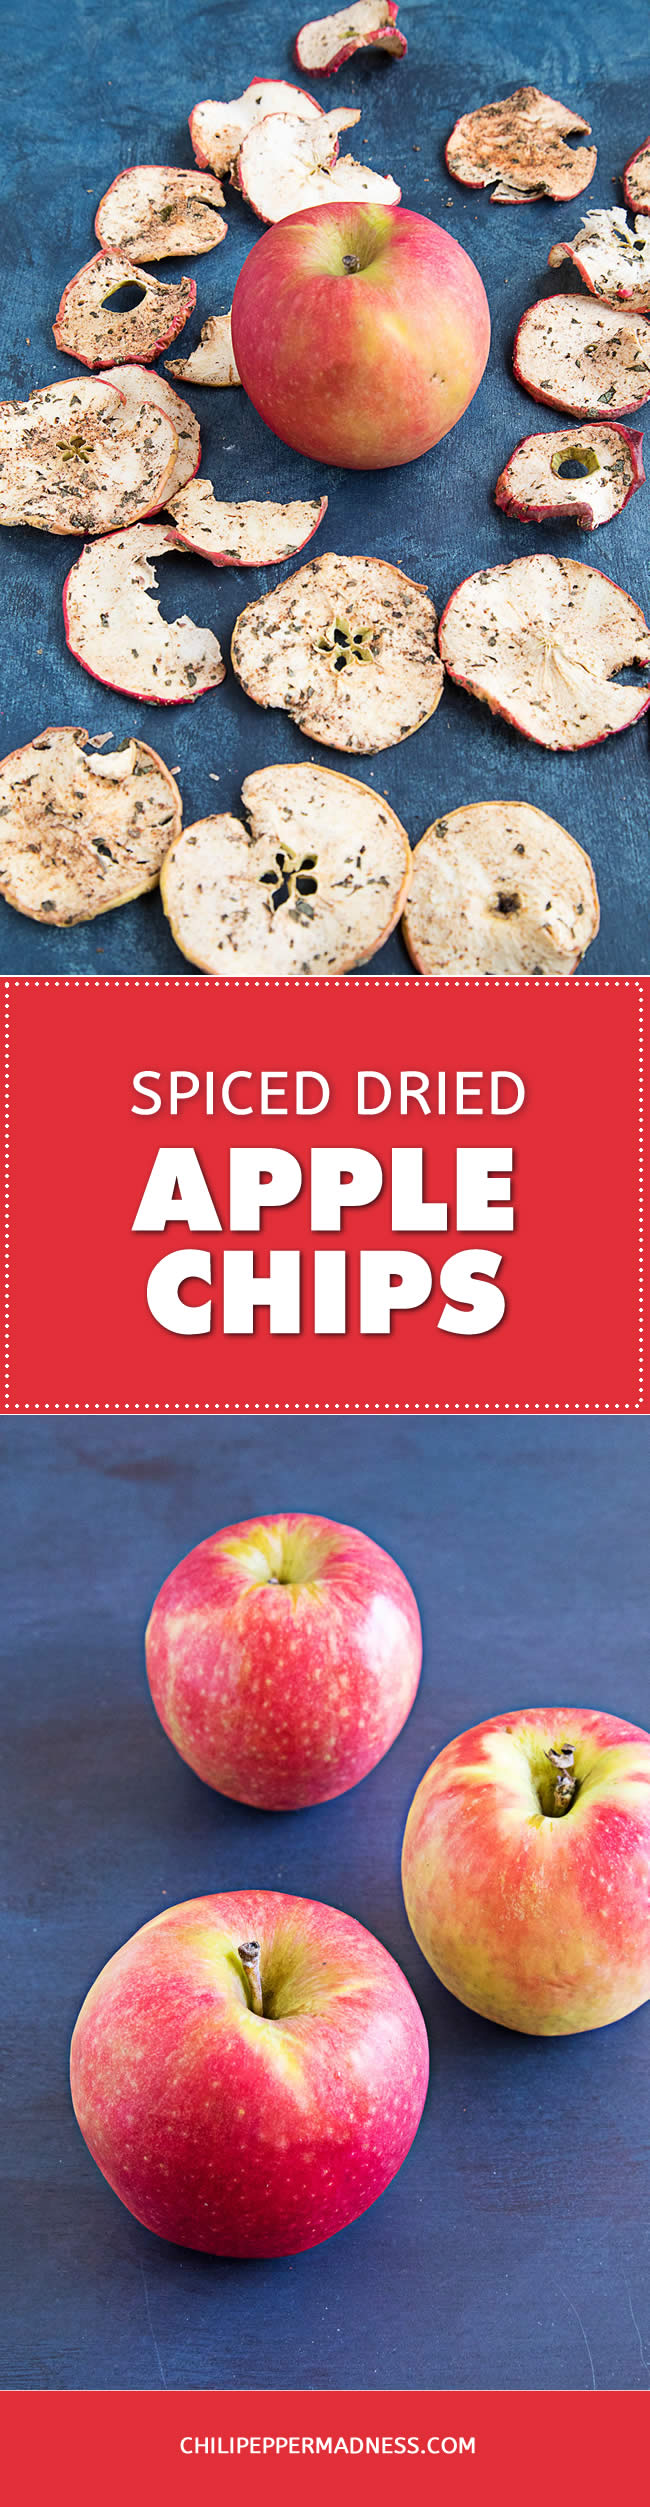 Spiced Dried Apple Chips - Recipe